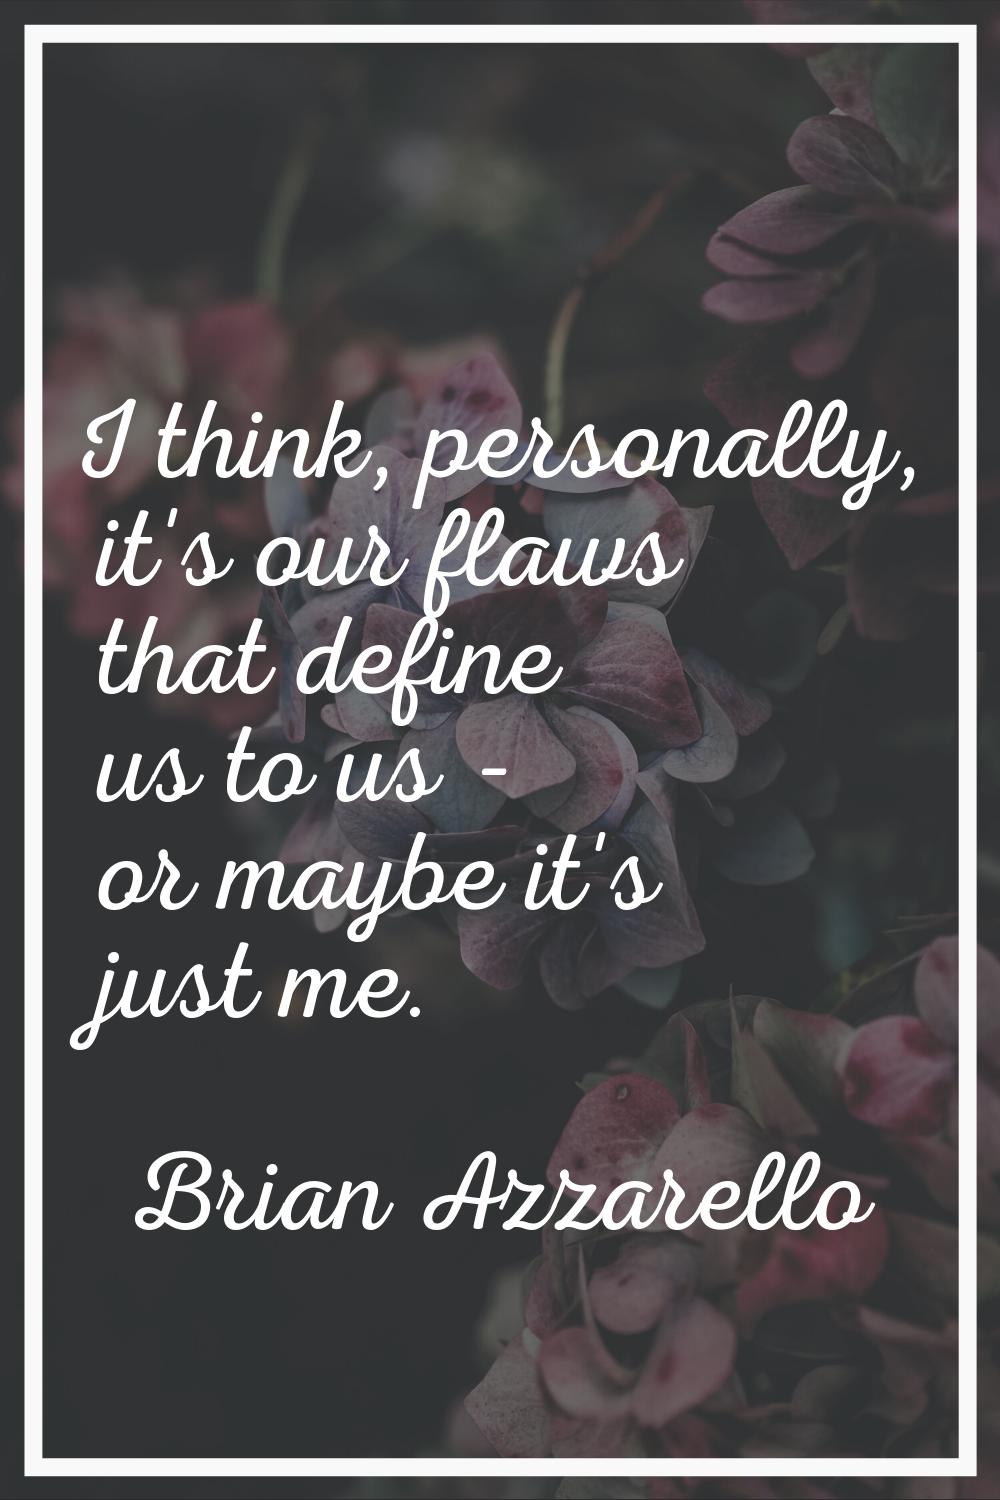 I think, personally, it's our flaws that define us to us - or maybe it's just me.